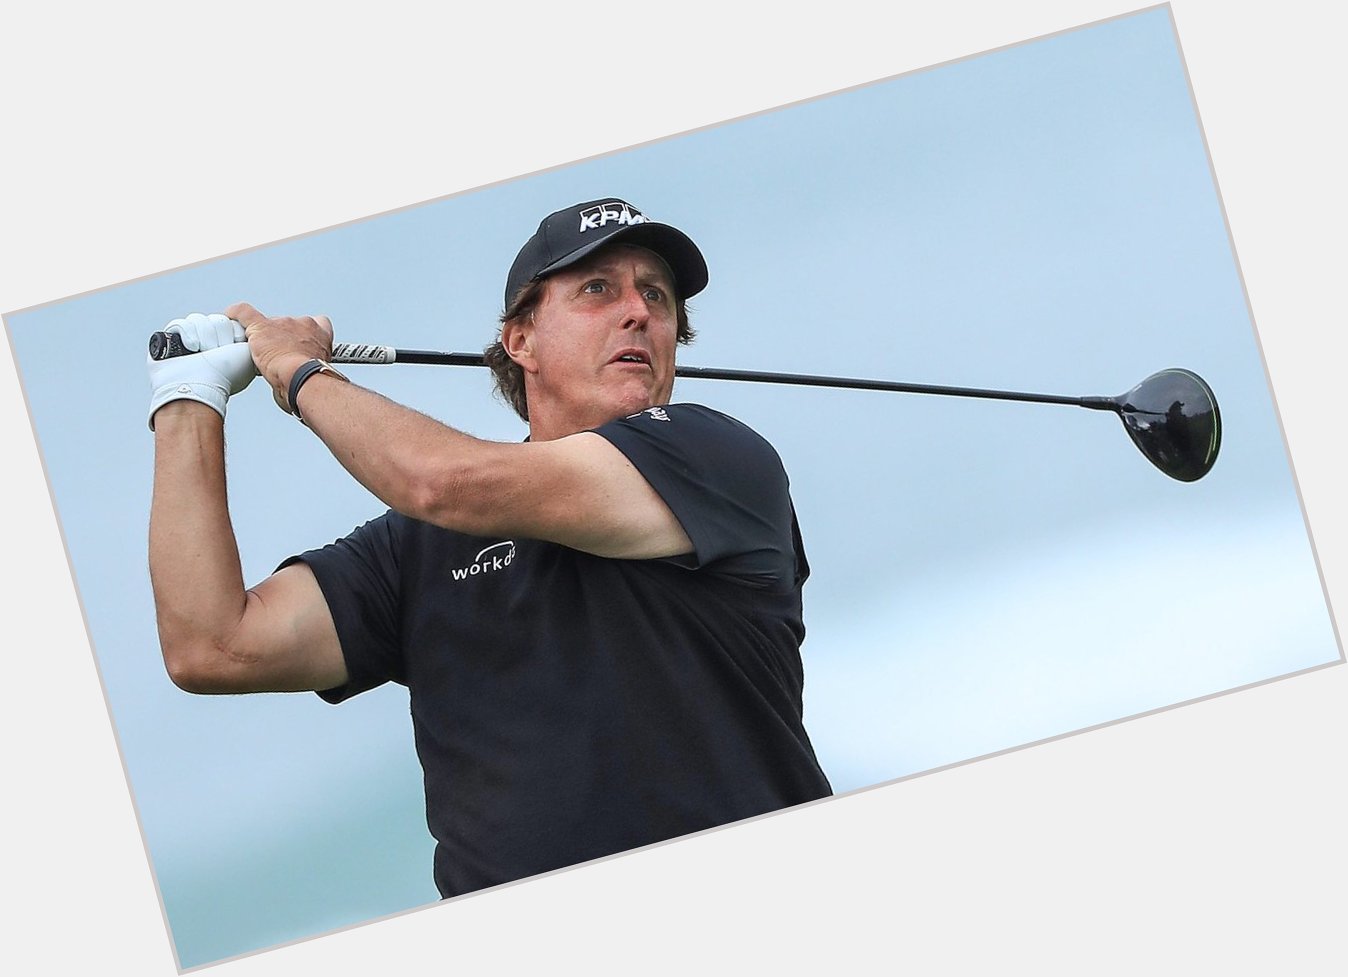 Golf Channel  Watch: Fans sing \happy birthday\ to Mickelson on first tee at Pebble Beach  